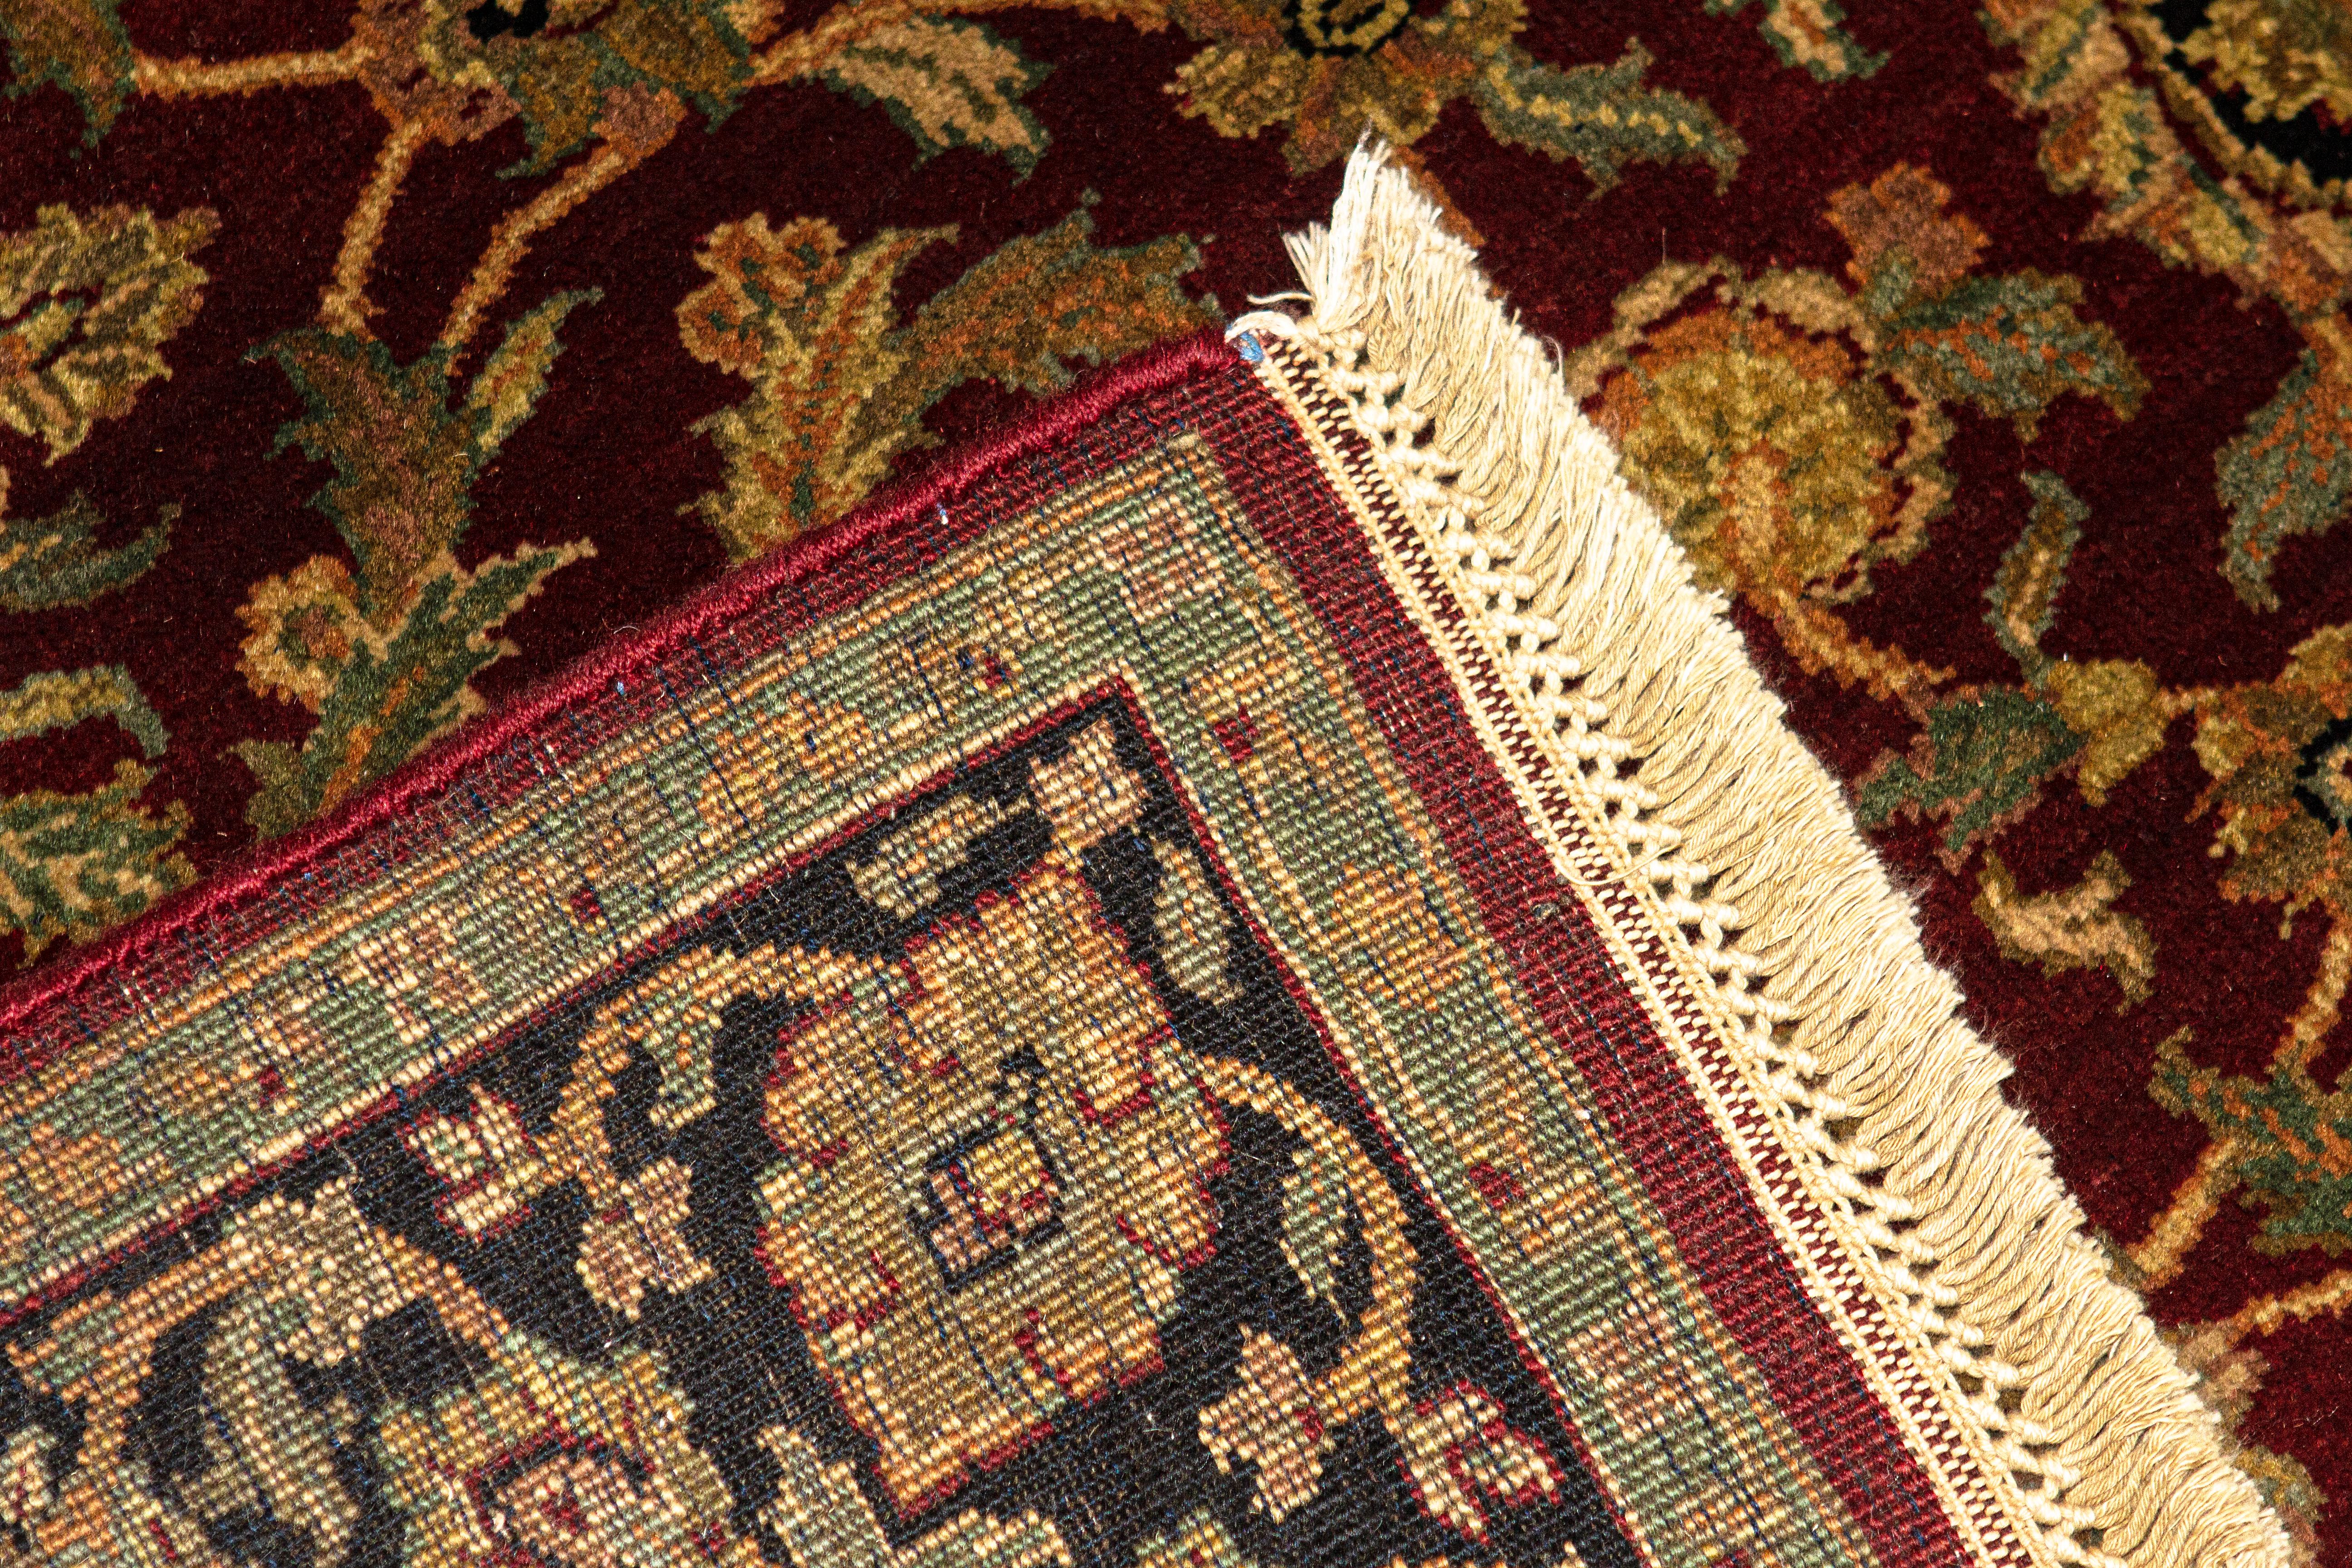 The authentic styles of traditional Oriental Masterpieces are recreated here, reflecting an ageless beauty in the presentation of these fine traditional hand woven rugs. Each piece is unique in representing carpets of a bygone age. The wool is from